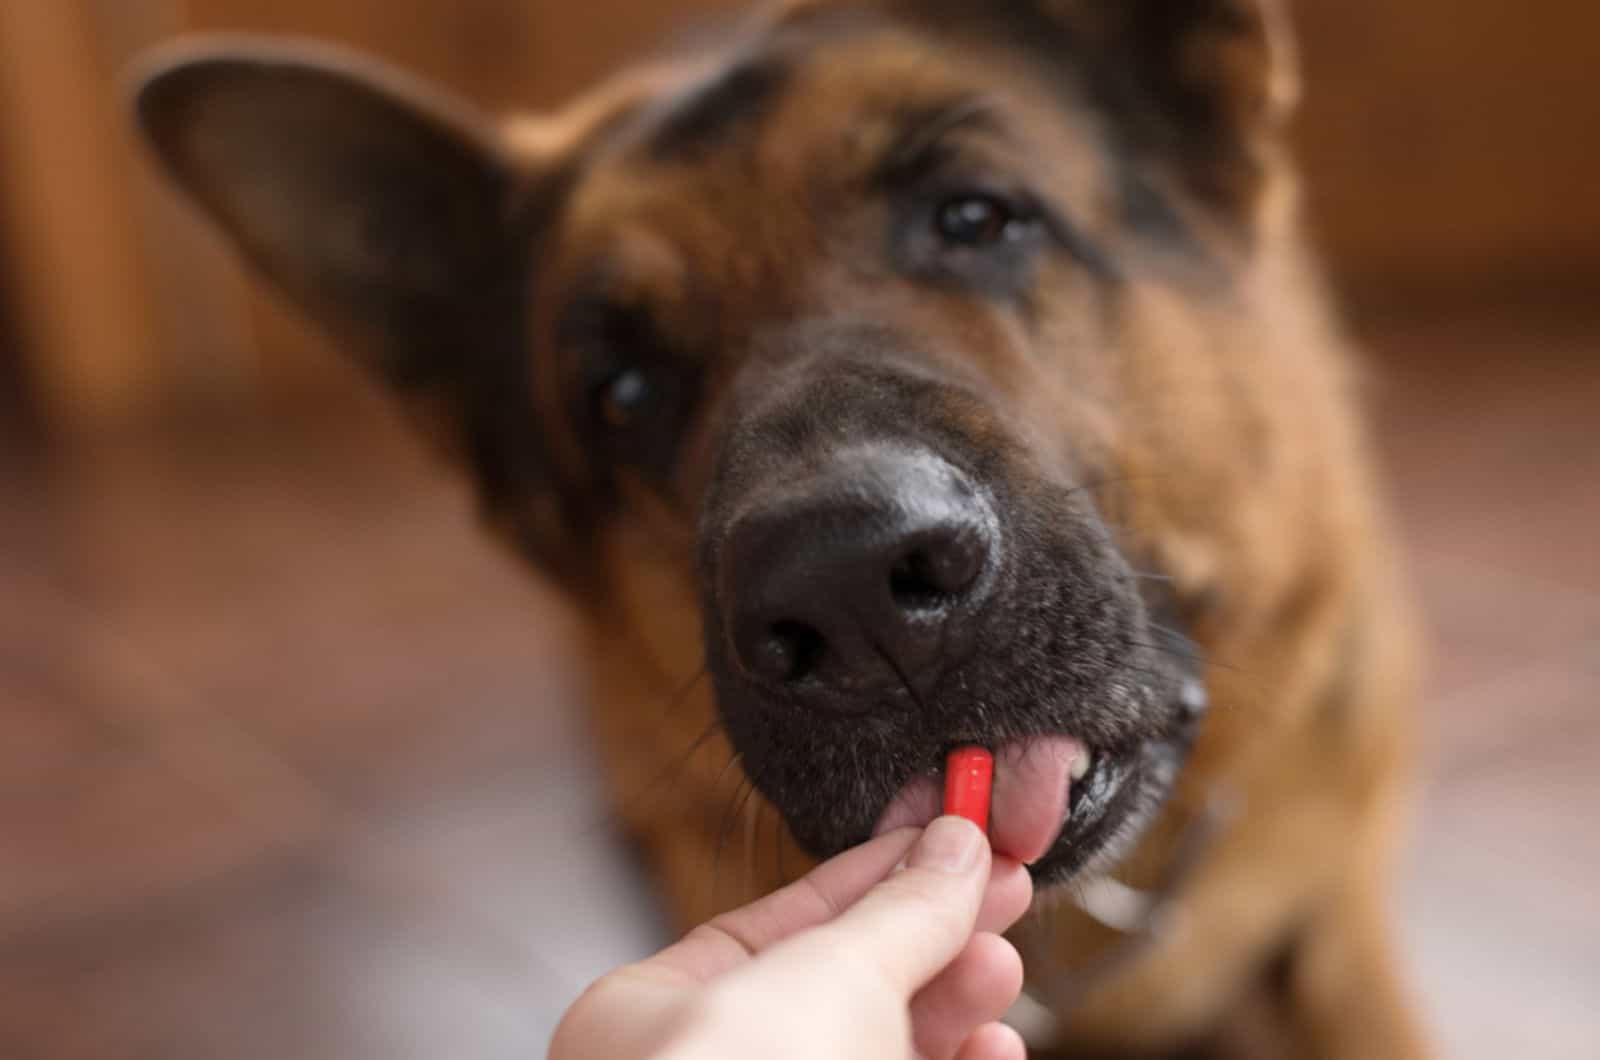 german shepherd eating a pill from owner's hand